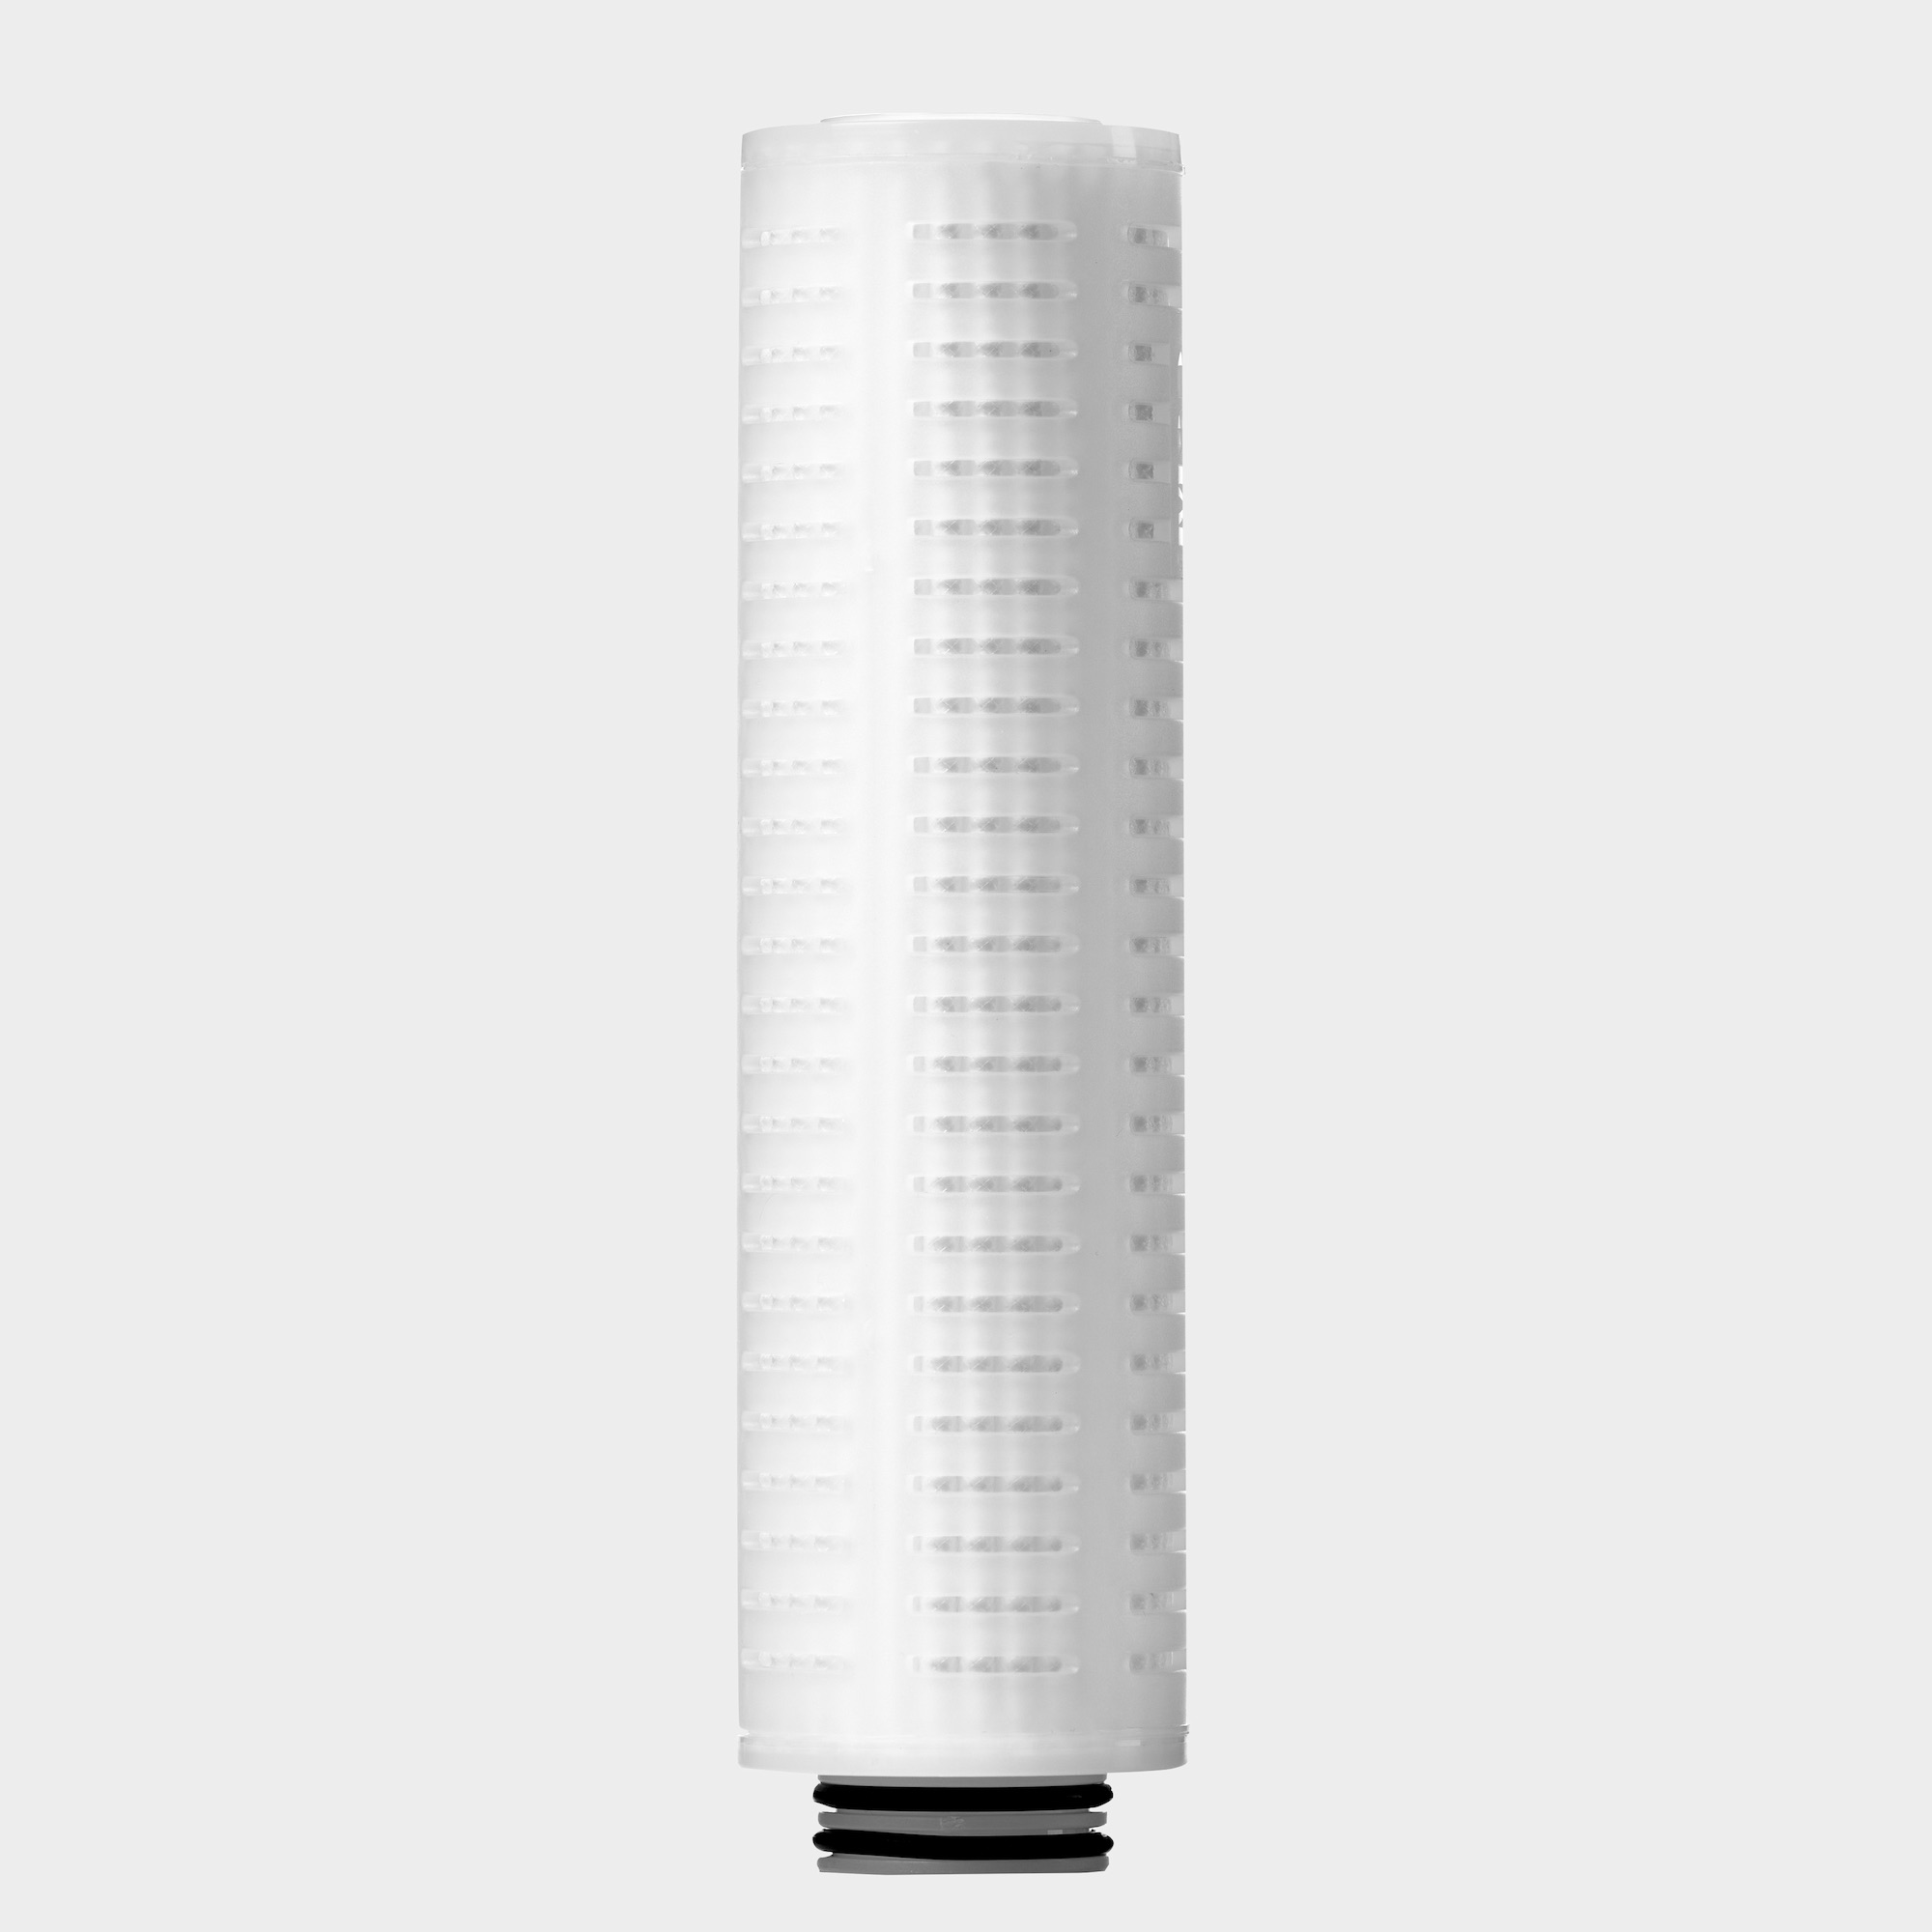 10 inch PP filter cartridge, 6 micron pleated PP, Code 0 222/Flat